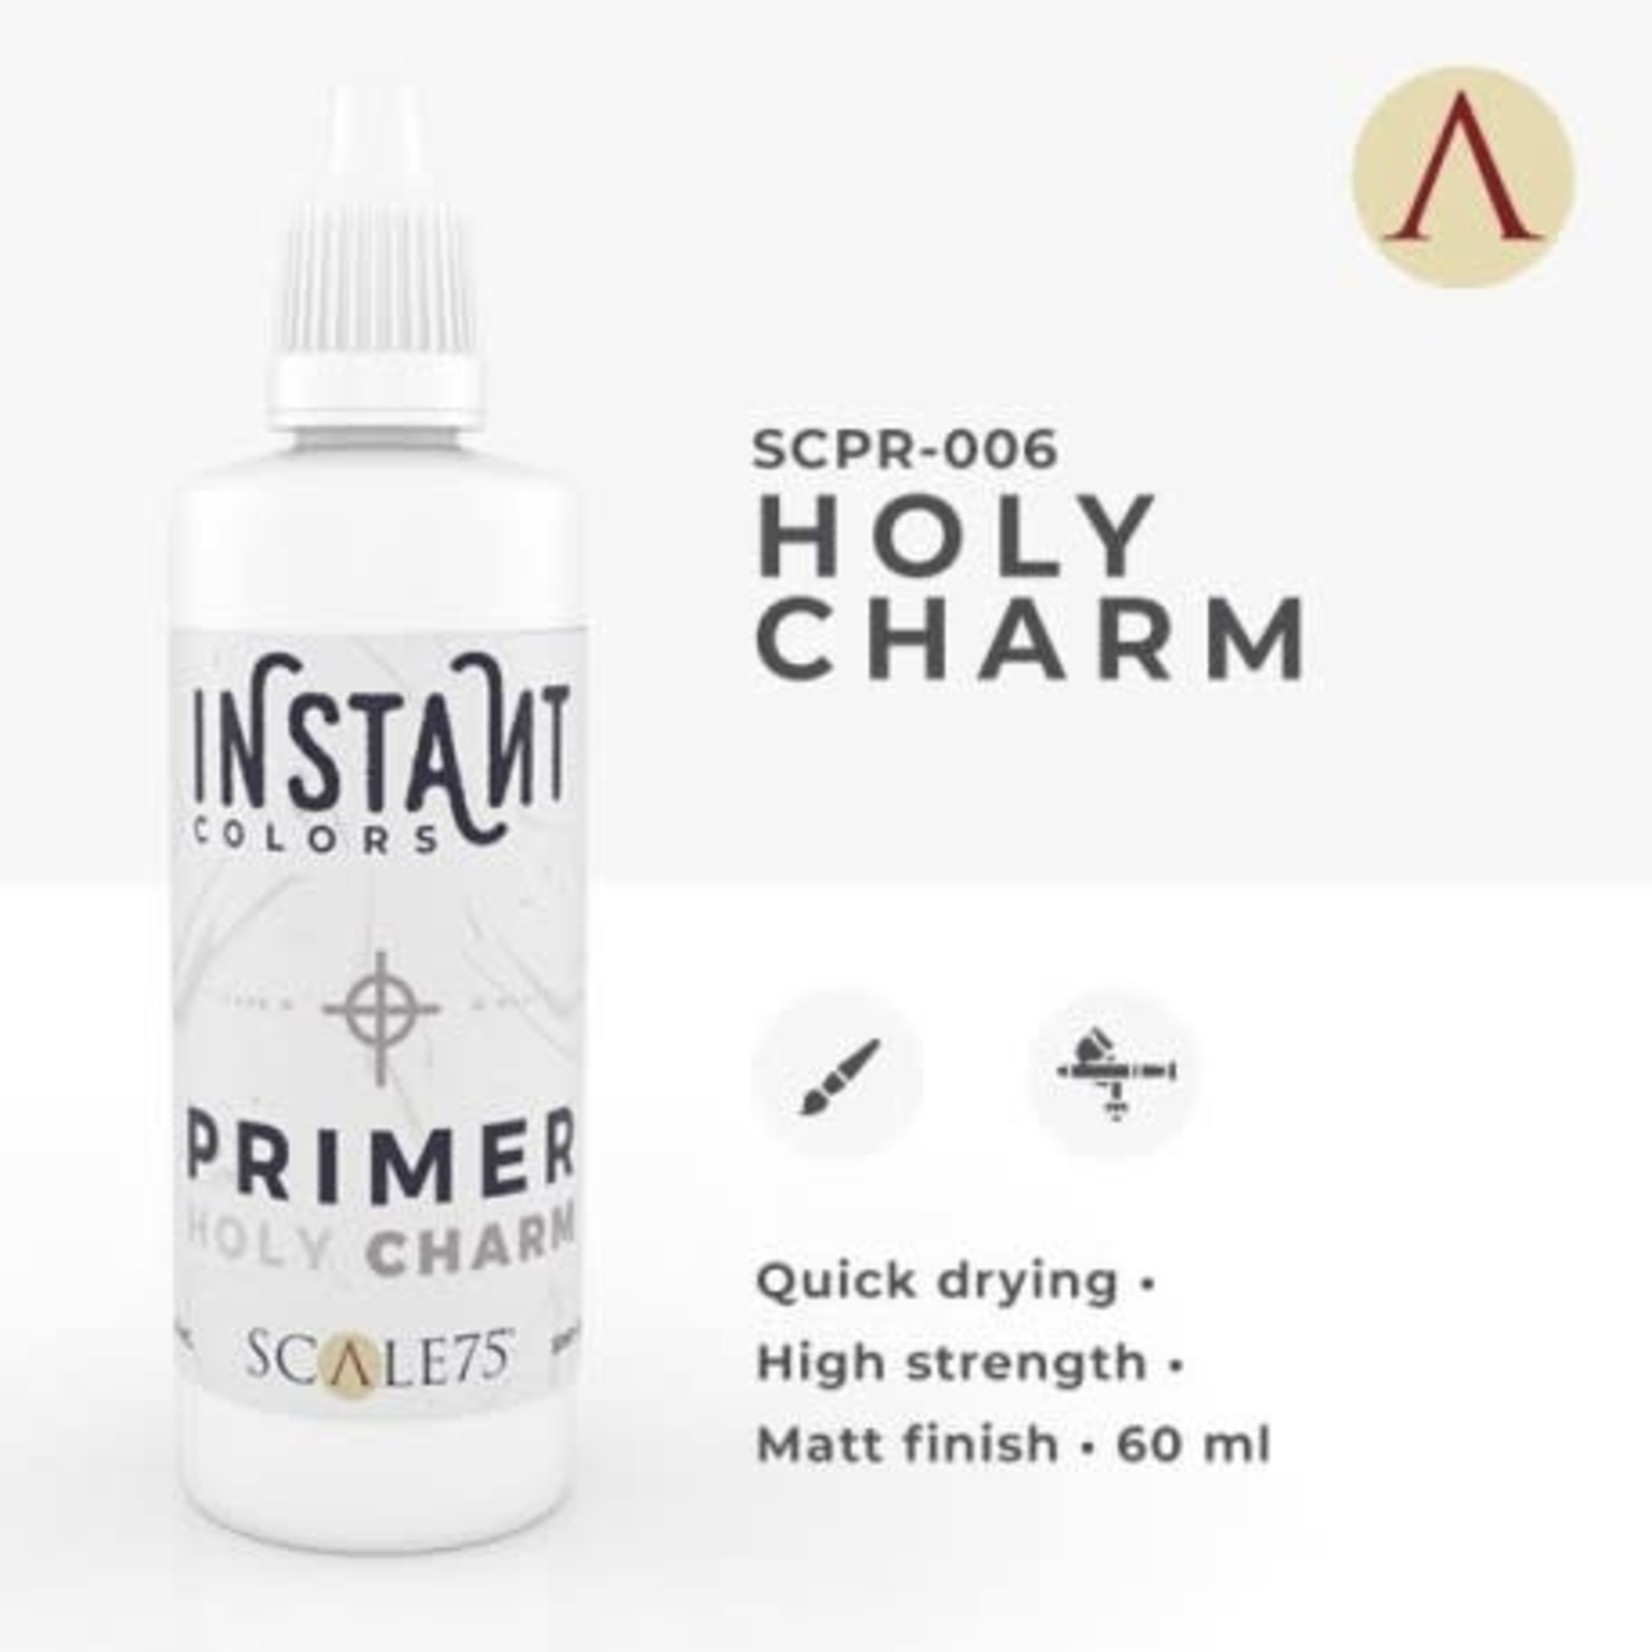 Scale 75 Instant Colors Primer SCPR006 Holy Charm 60ml